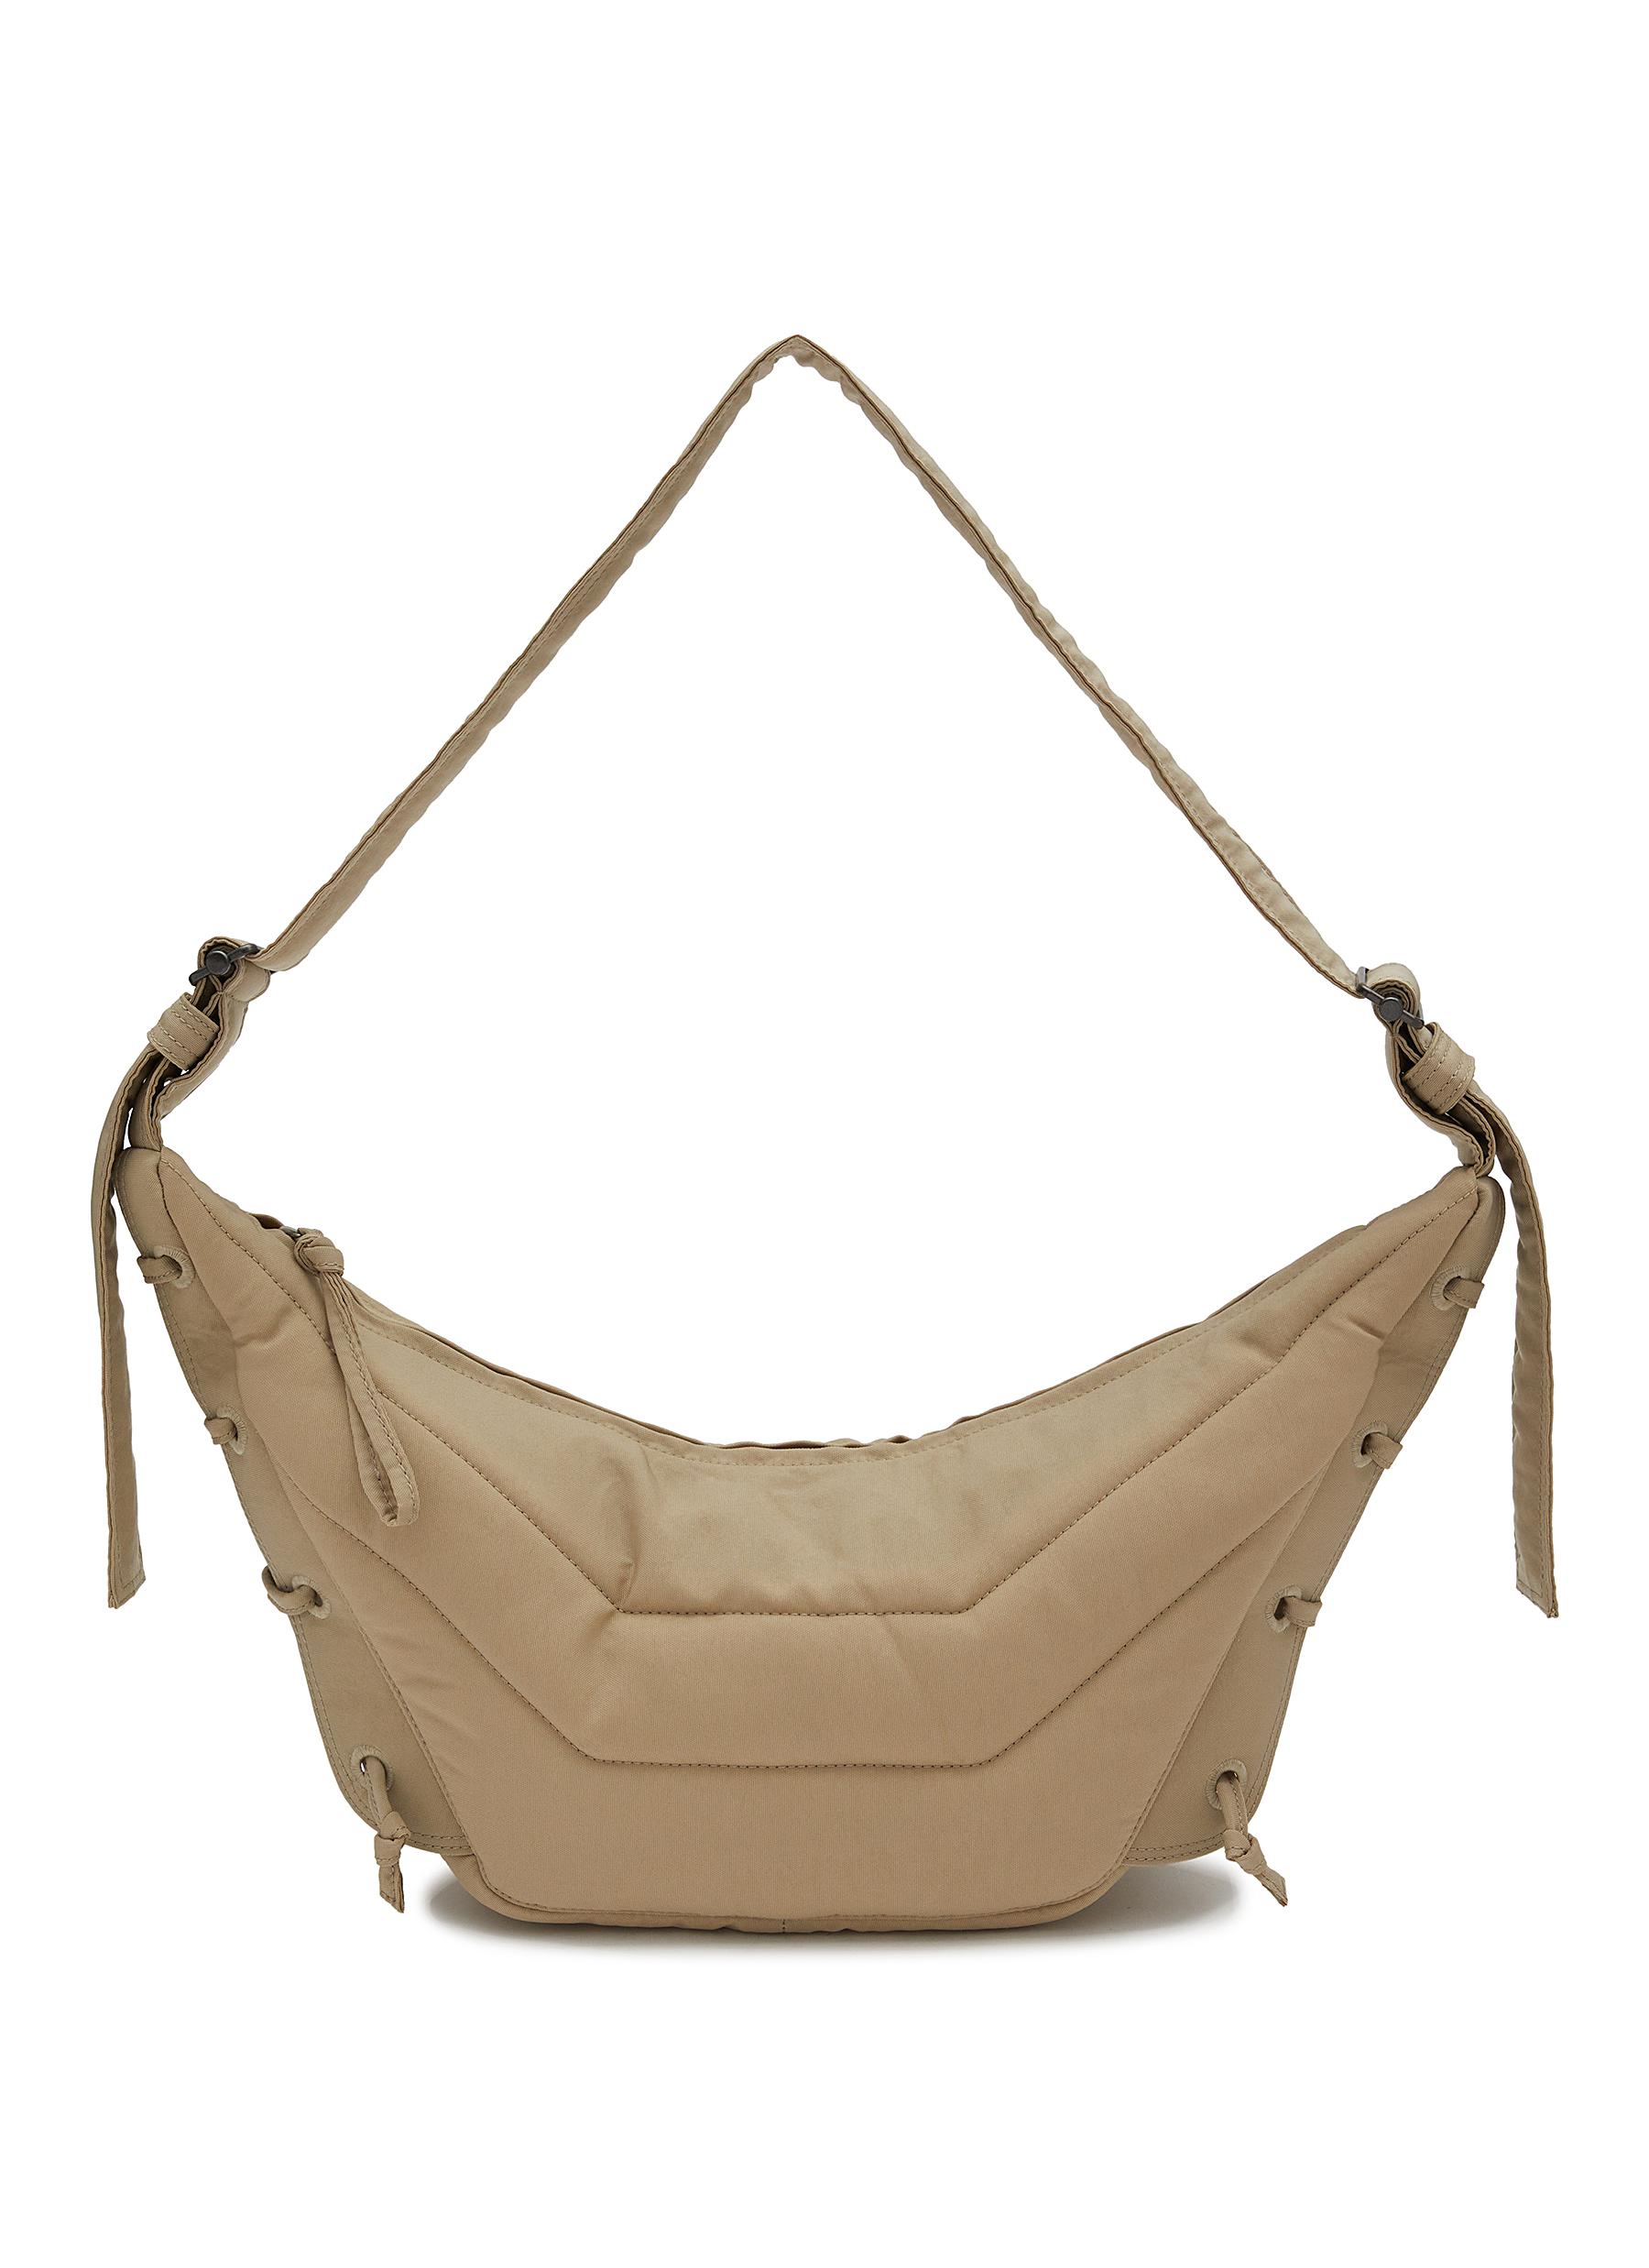 LEMAIRE | Small Soft Game Canvas Shoulder Bag | Women | Lane Crawford